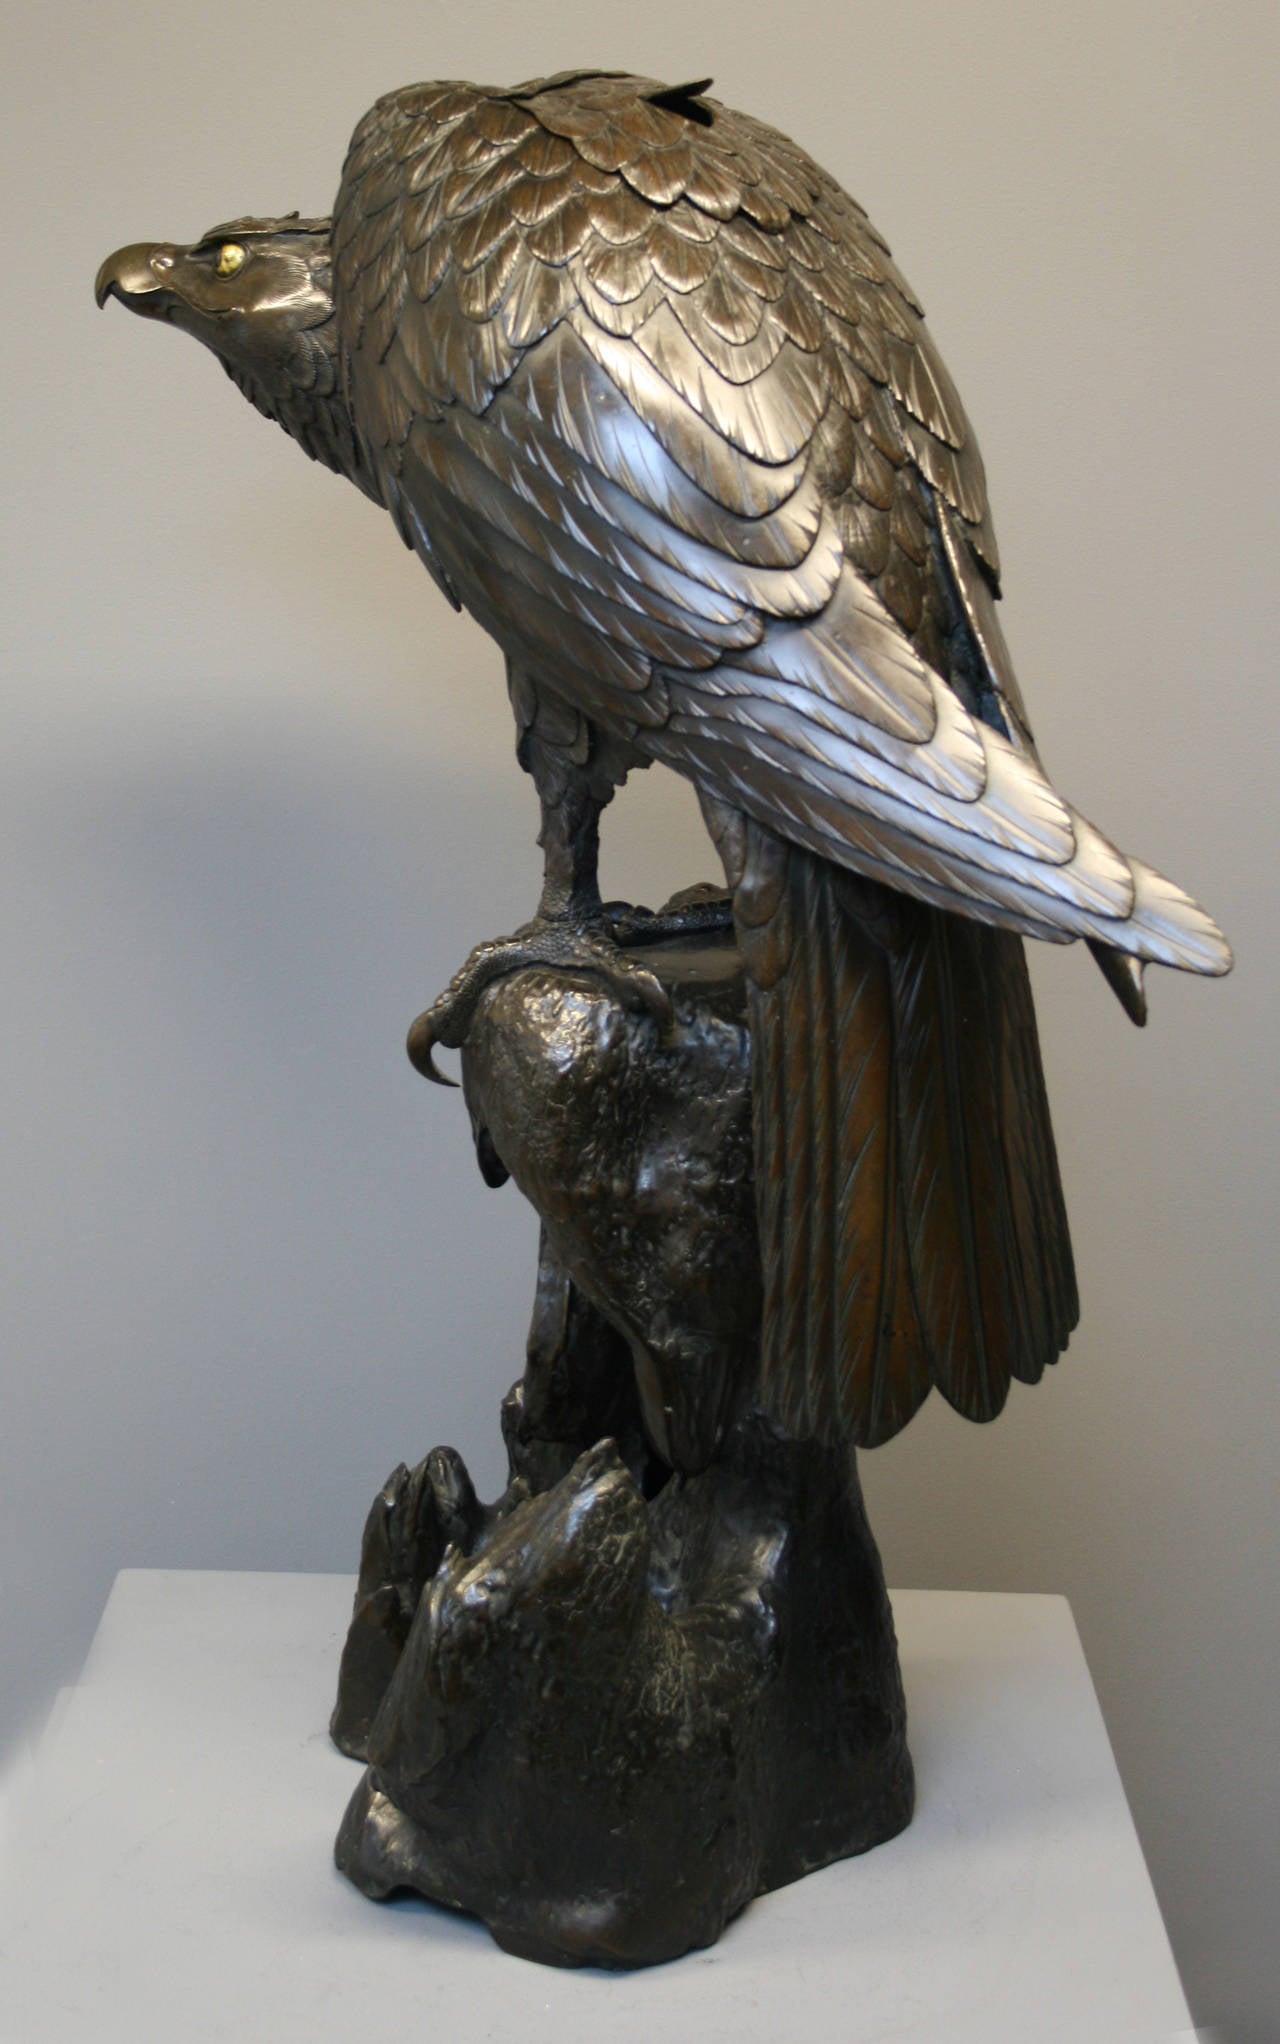 A very large Japanese bronze koro, or incense burner in the form of a hawk perched on a gnarled piece of wood. A back section of feathers lifts off to allow incense to be placed inside, you can see this in the fourth photo, one of the feathers is